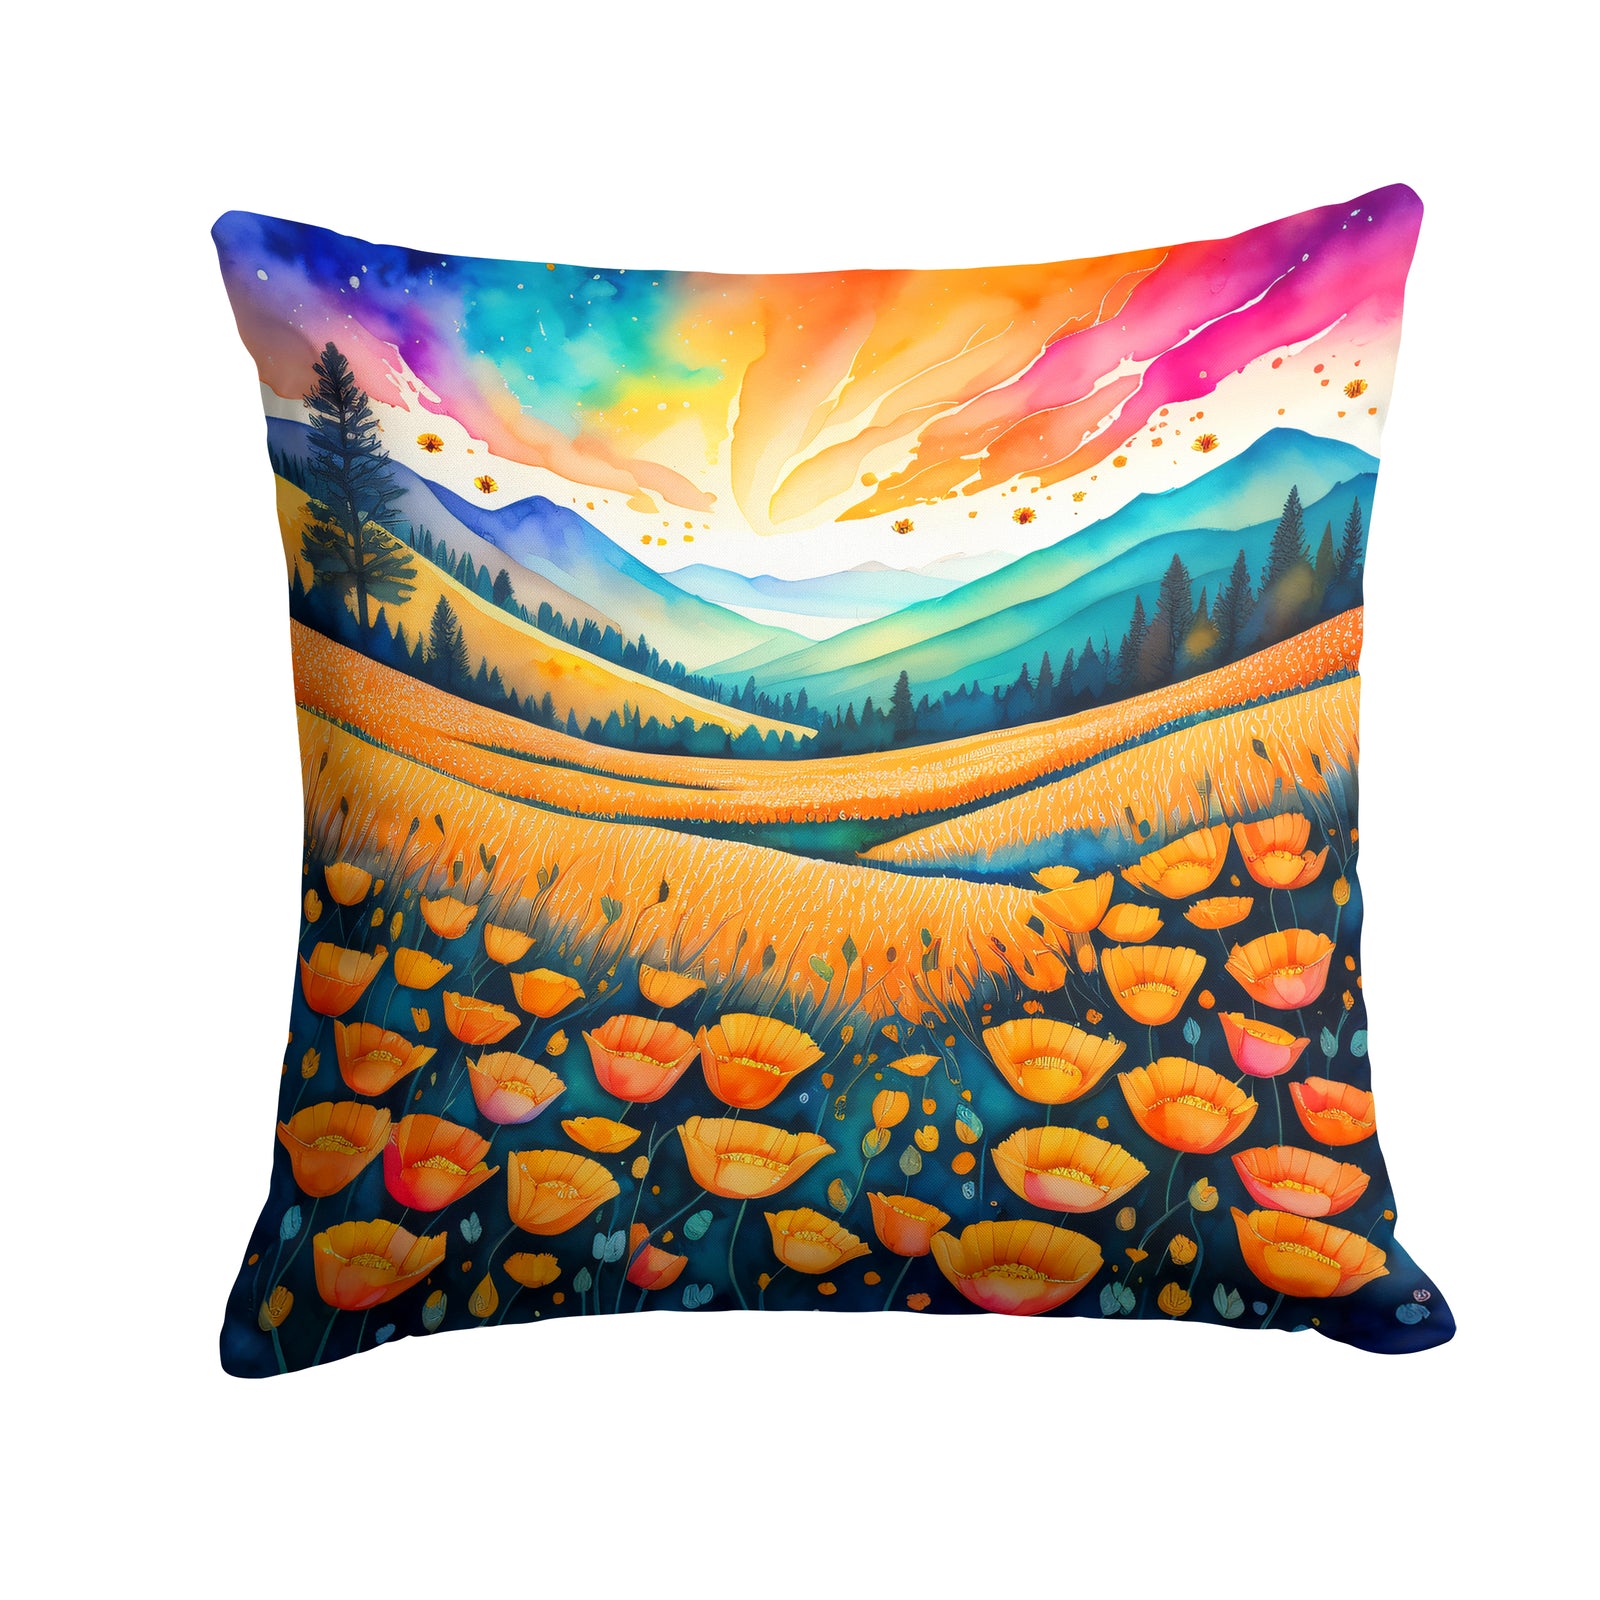 Buy this Colorful California poppies Fabric Decorative Pillow